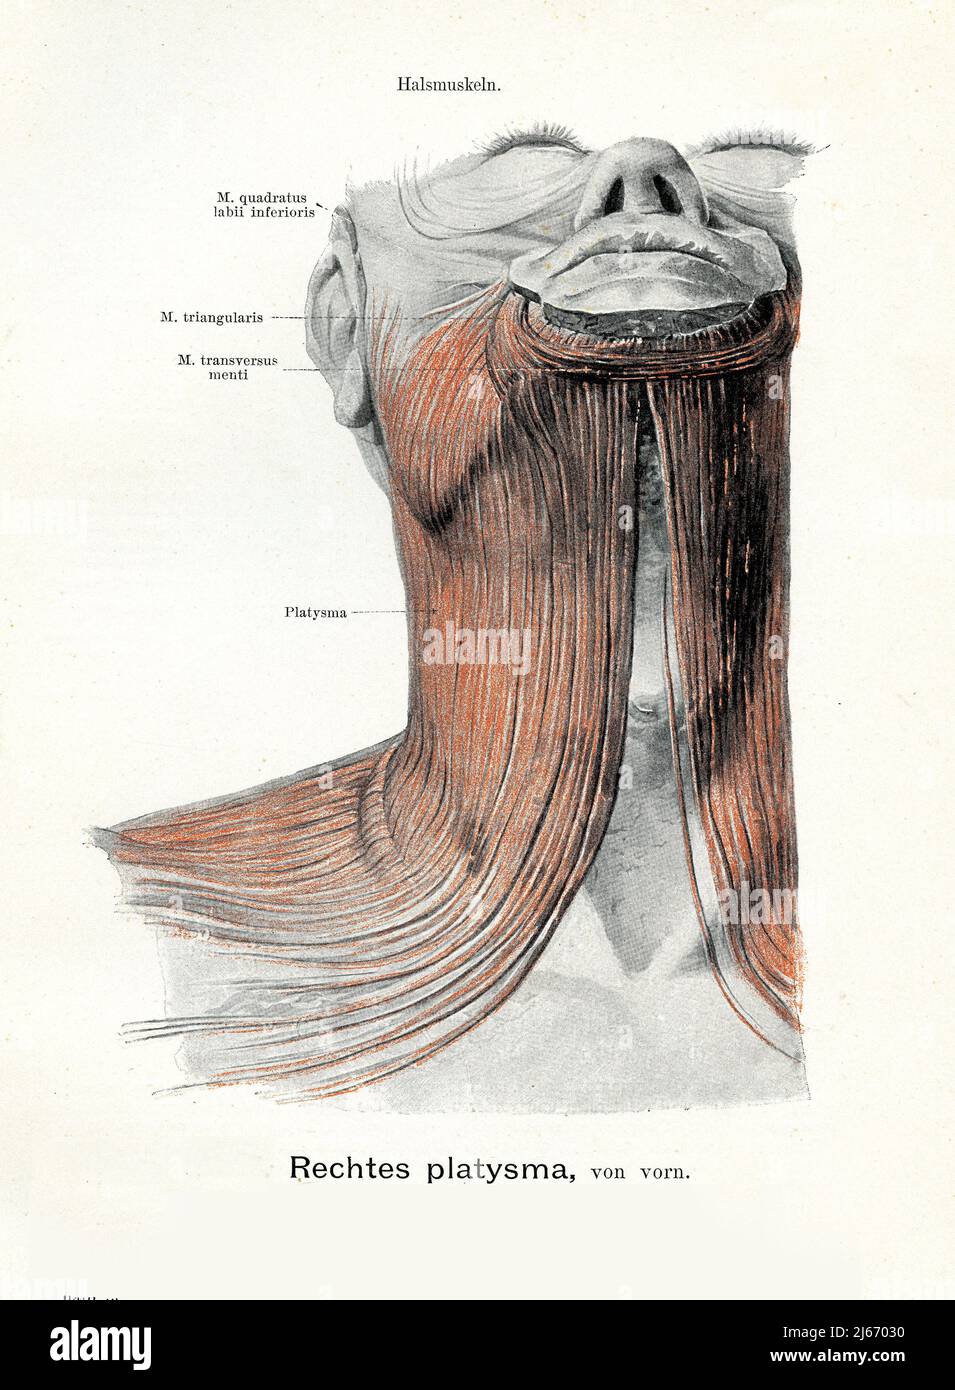 Vintage illustration of the platysma muscle front-right attached to the mandible, with German anatomical descriptions Stock Photo